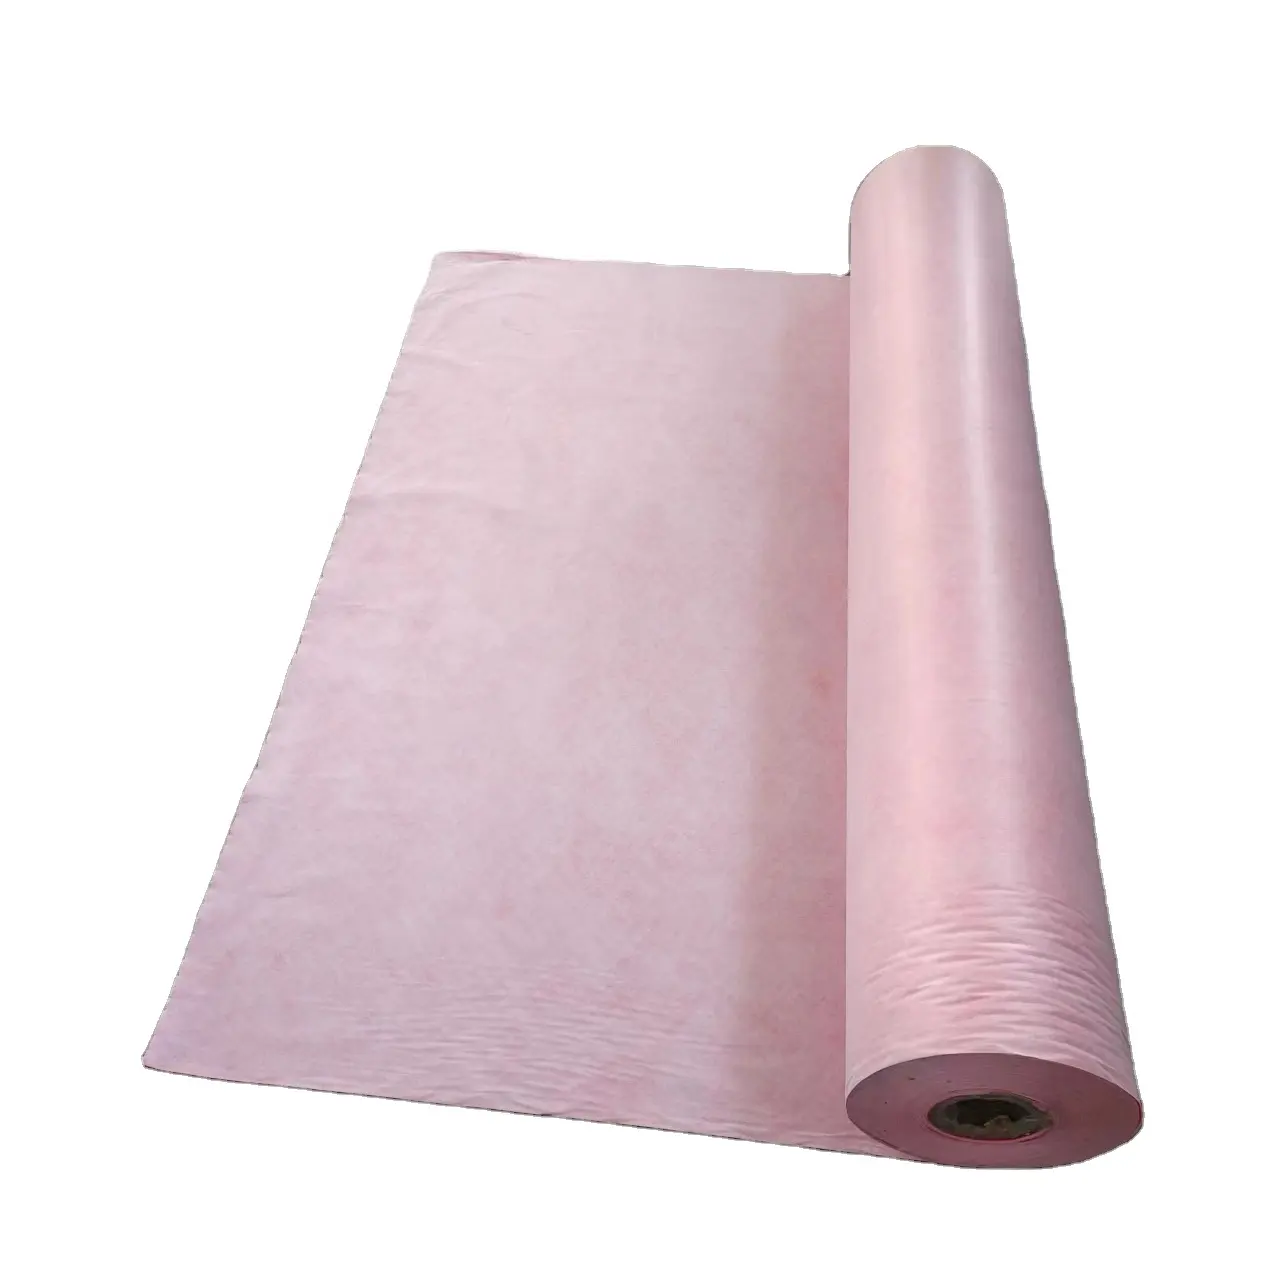 Kingway Factory Sale Waterproof Vapor Barrier for Roof Underlayment, Fire Resistant Roofing Material for Construction